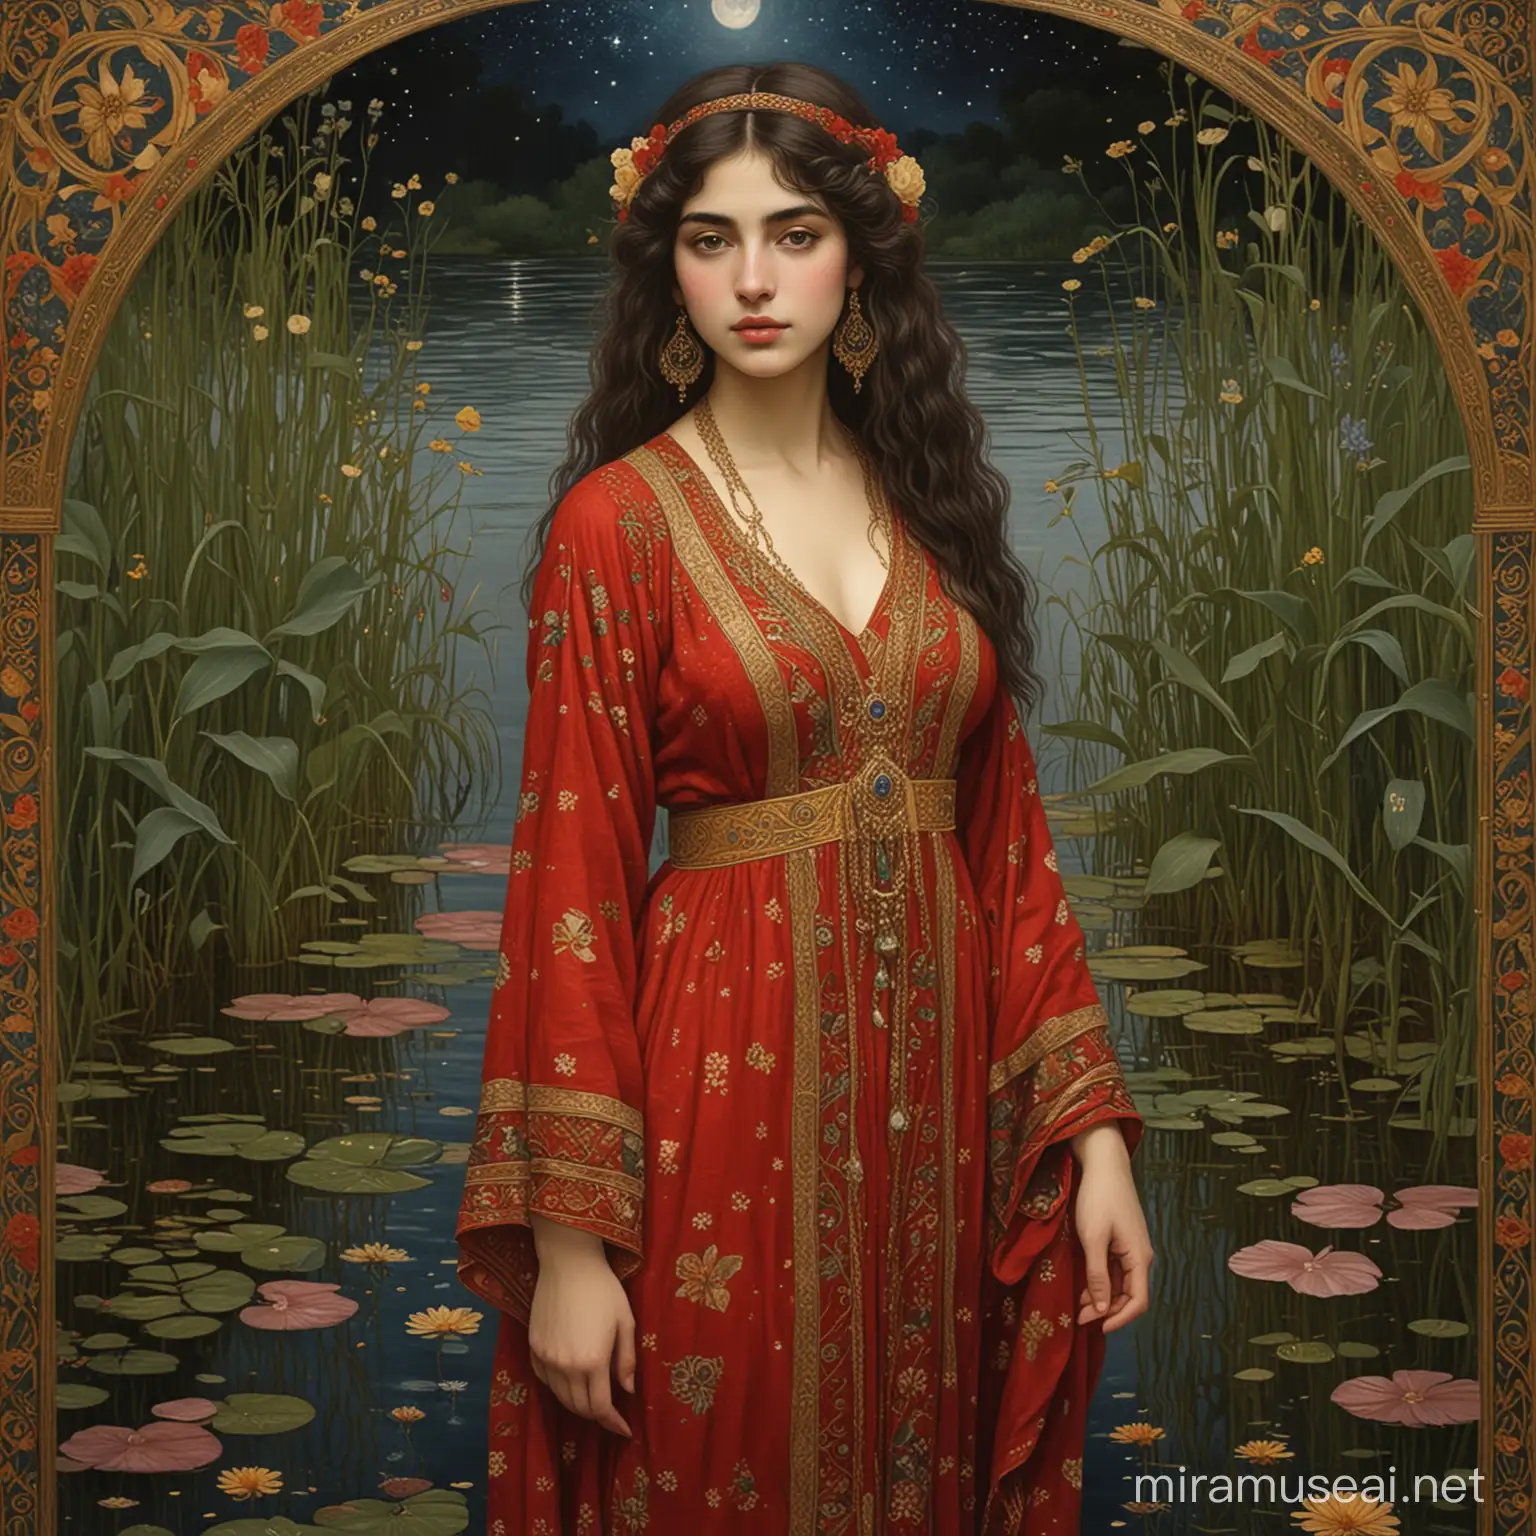 ghajar persian girl Graphics in the art nouveau style of artist Gustav Klimt. The graphics have borders with floratures. In the picture,  stocky build is standing in the water.. He wears only a red linen loincloth. Water, reeds and bamboo and persian carpet in the background. It is a dark night and only the stars shine in the sky.